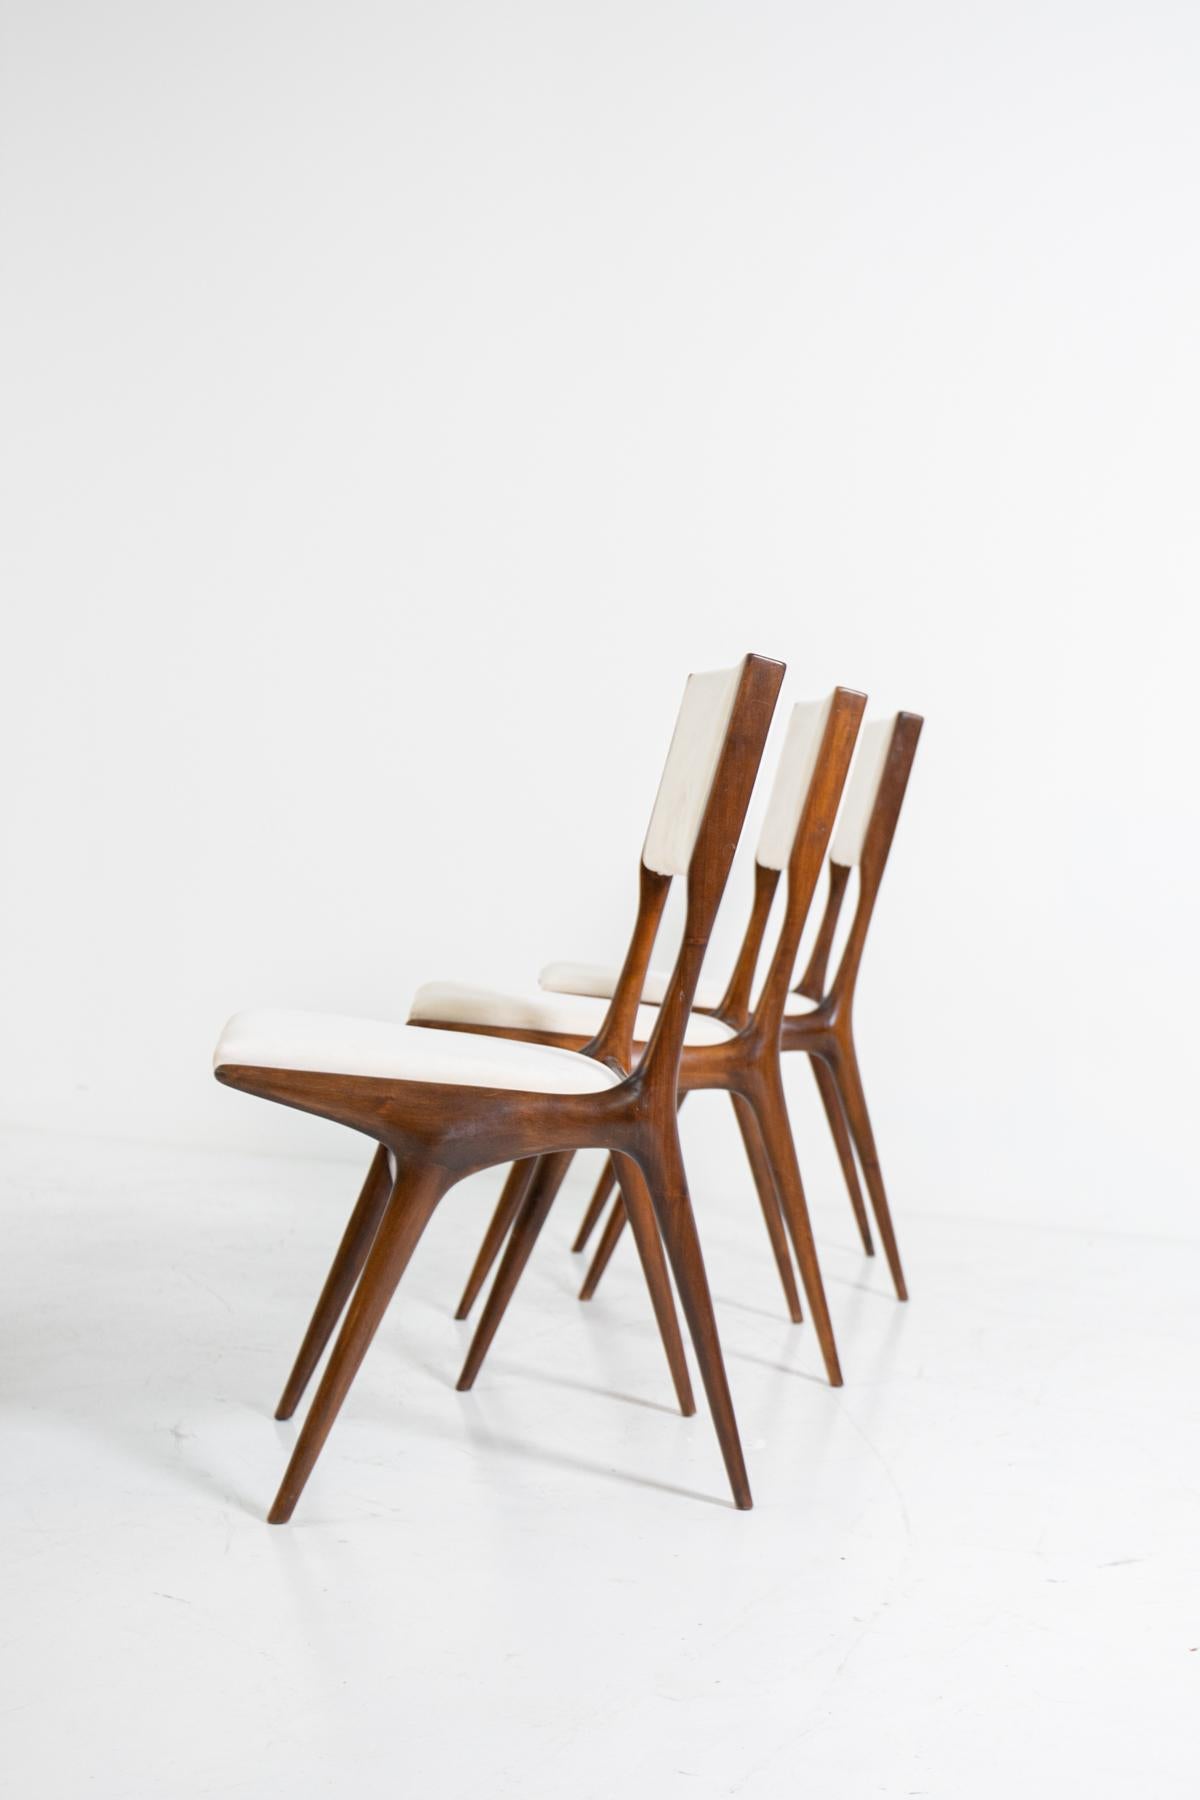 Rare and beautiful set of 6 chairs Carlo de Carli model 158 for Cassina. The chairs are made of Italian walnut. The backrest and seat have been upholstered in white velvet fabric. The particularity of the chairs is the protruding ashlar on the